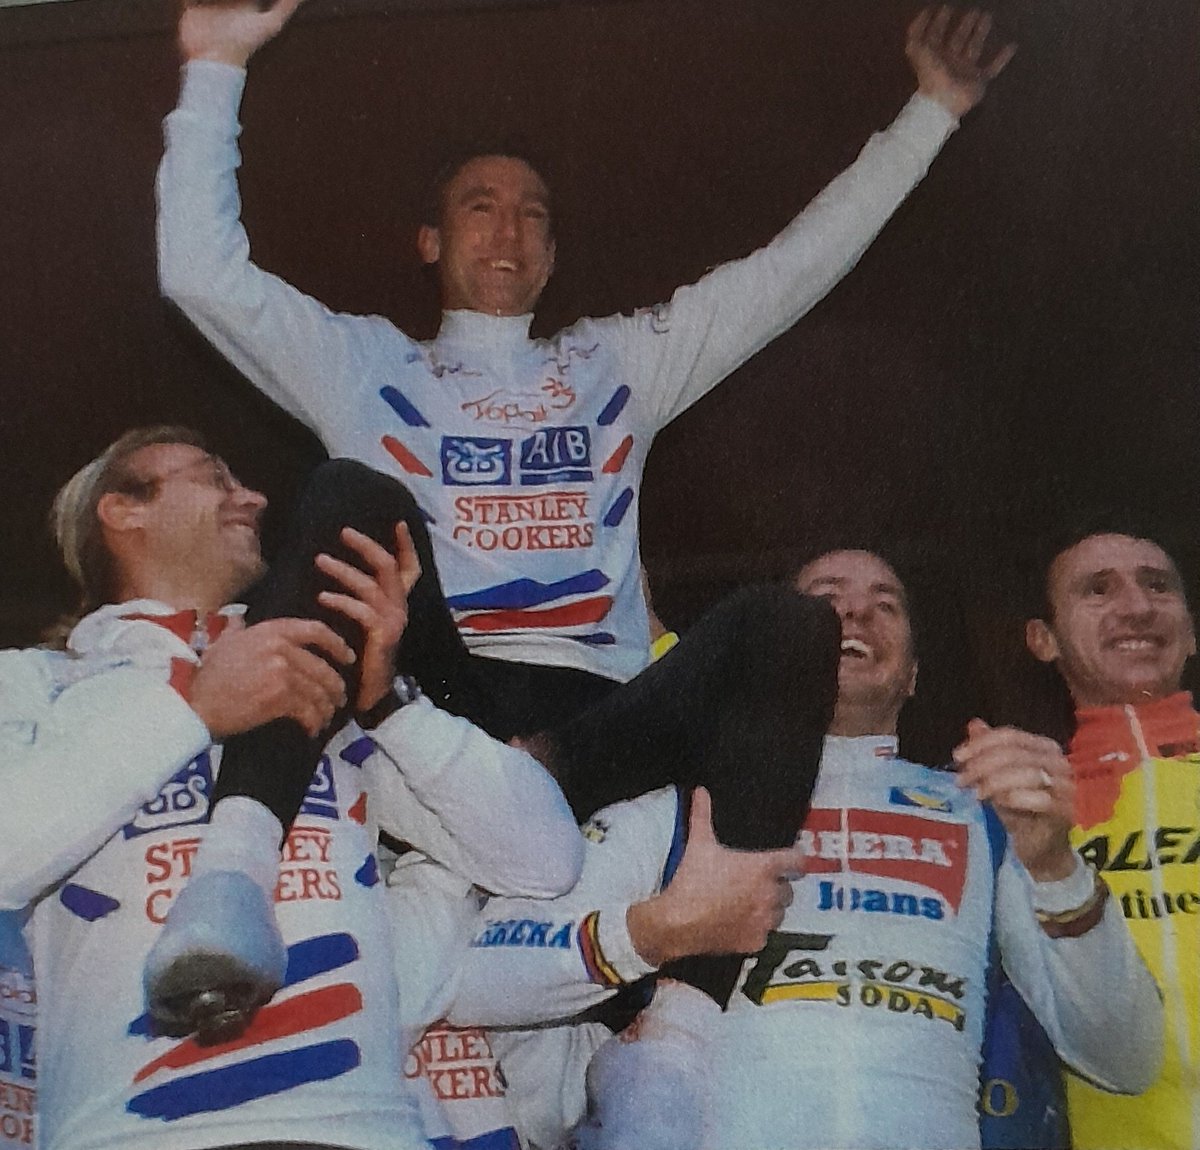 Sean Kelly raises his arms one last time as he wins his own Celebration Race after retiring at the end of 1994. Leading the group on the celebration ride in picture 2 with Roger De Vlaeminck in the woolley hat and then held aloft by Laurent Fignon and Stephen Roche @PhilOCPhotos